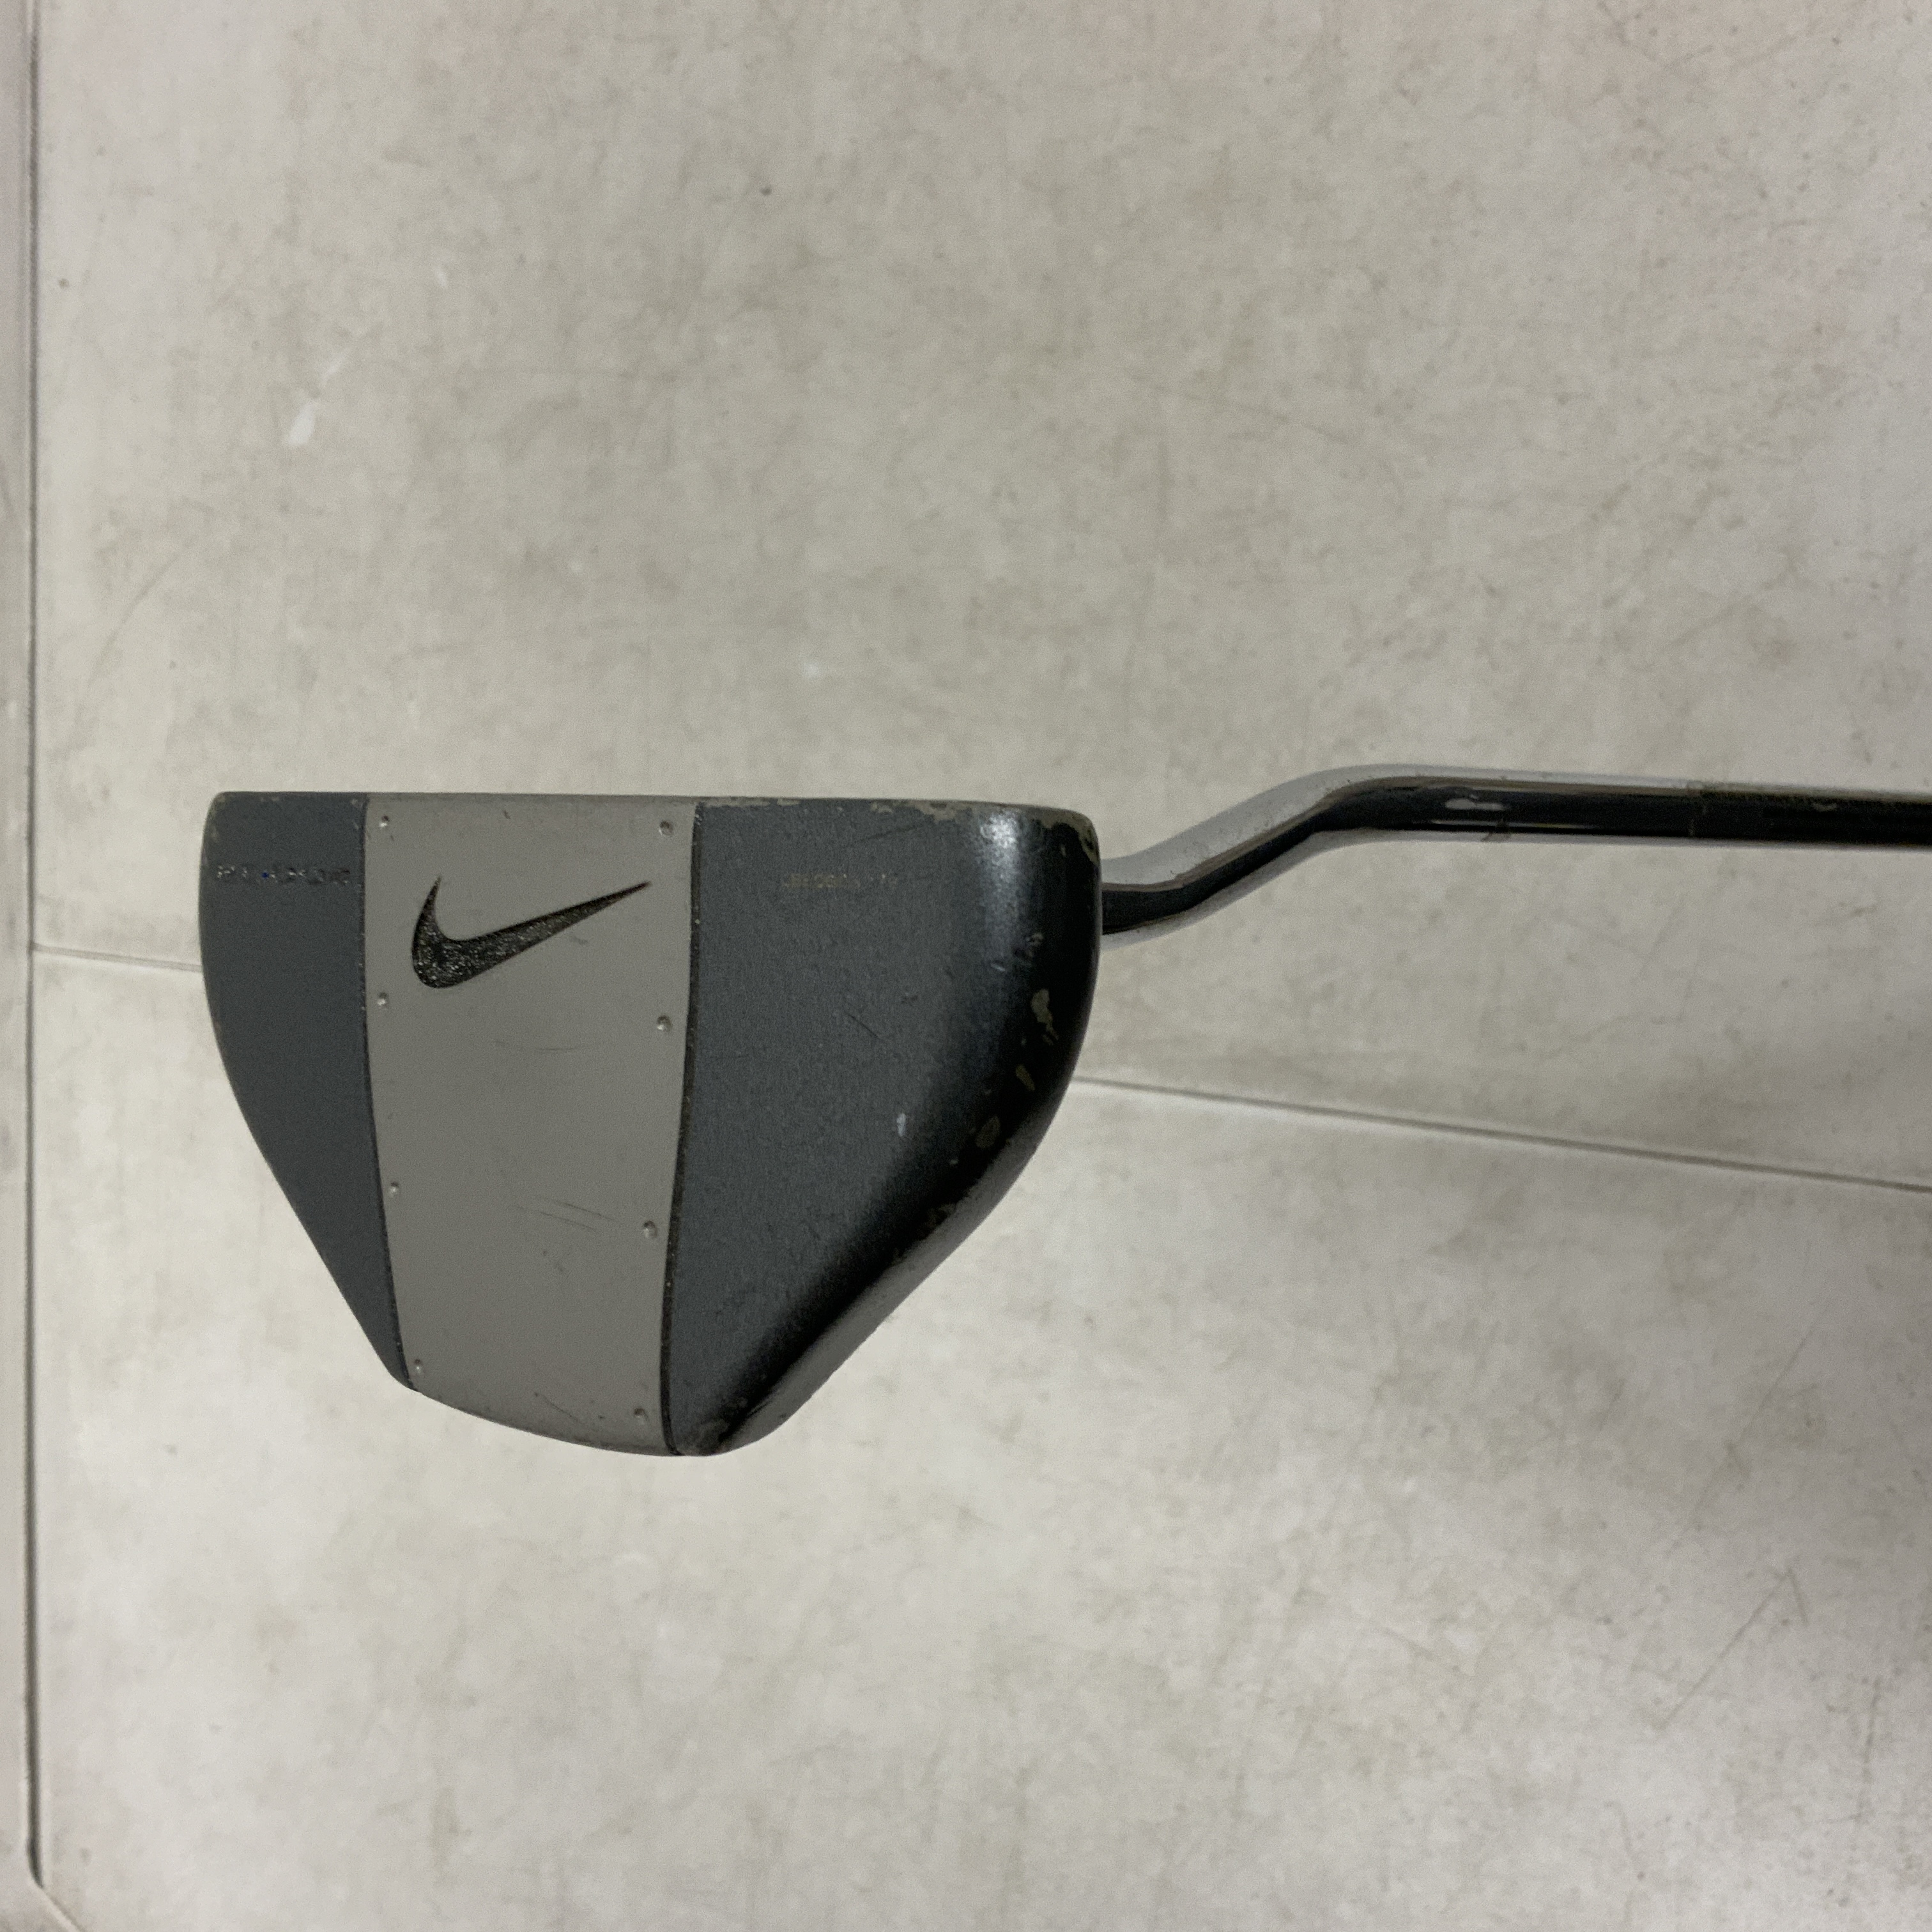 Used Nike T80 Mallet Putters